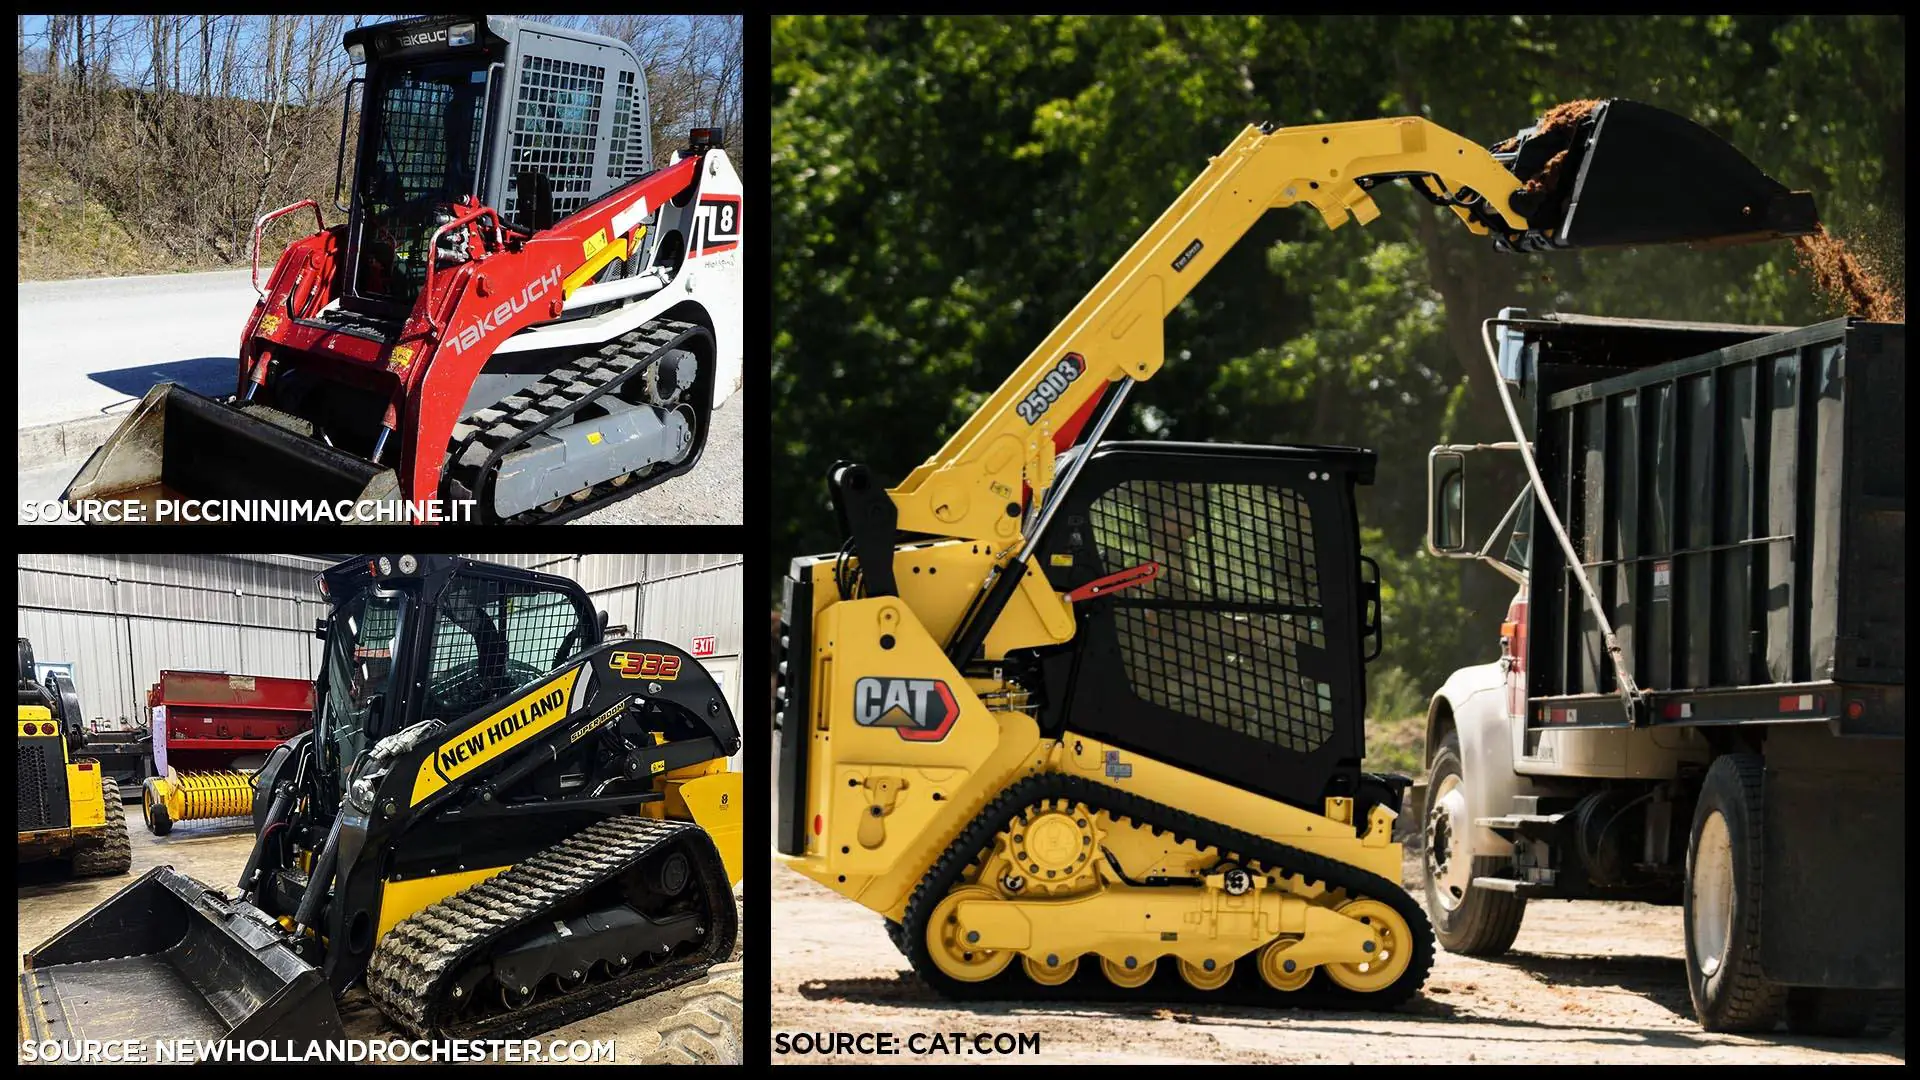 Comparison between the Cat 259D3, the Takeuchi TL8, and the New Holland C332.